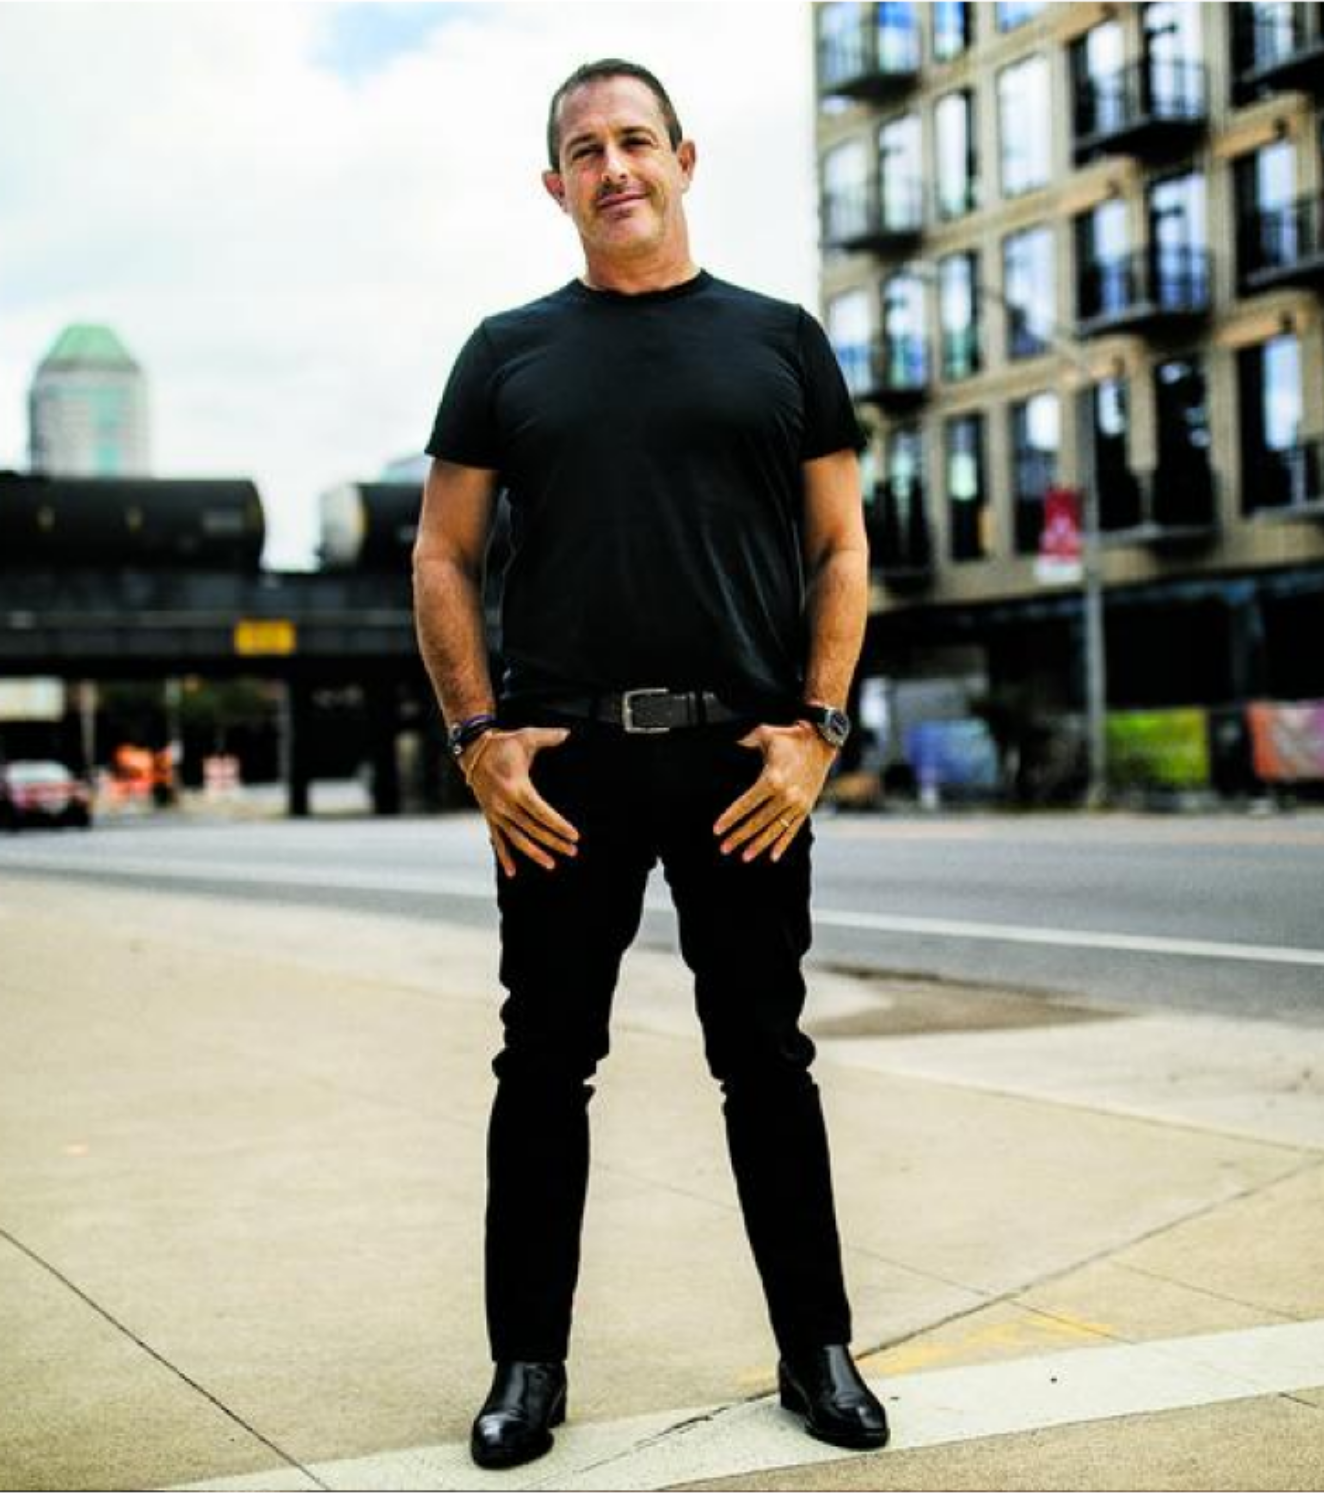 Building on a Vibe: Developer Brett Kaufman is helping lead the transformation of Franklinton from an unpolished gem into an artful destination